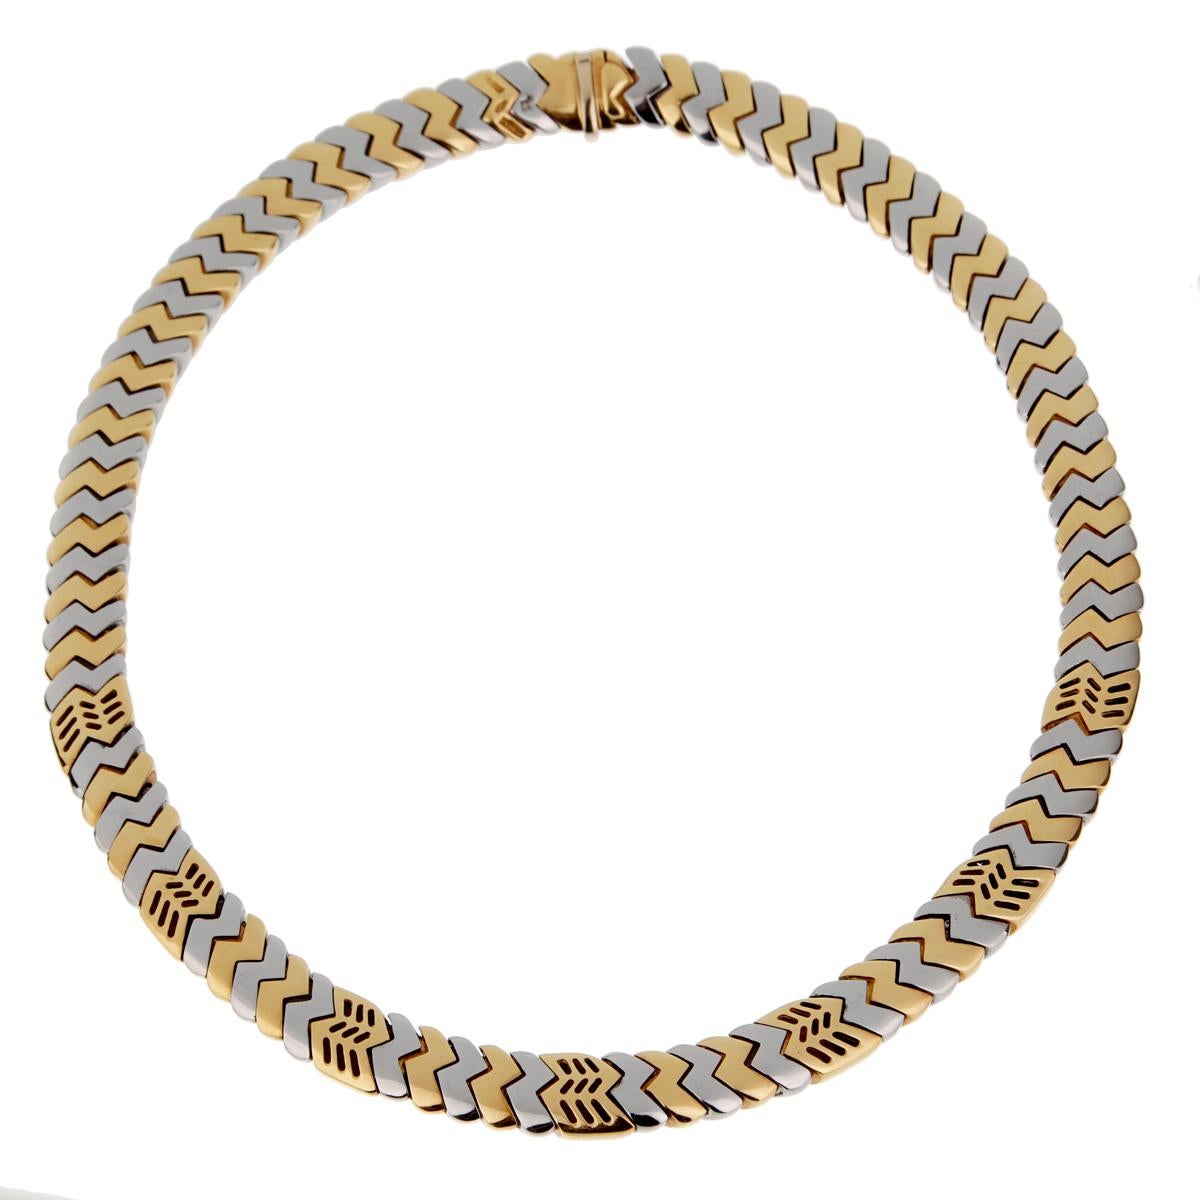 An iconic Bulgari yellow gold necklace from the Bulgari Spiga collection. The necklace consists of alternating yellow and white chevrons interlinked together. The necklace measures 15 1/2 inches long and .39